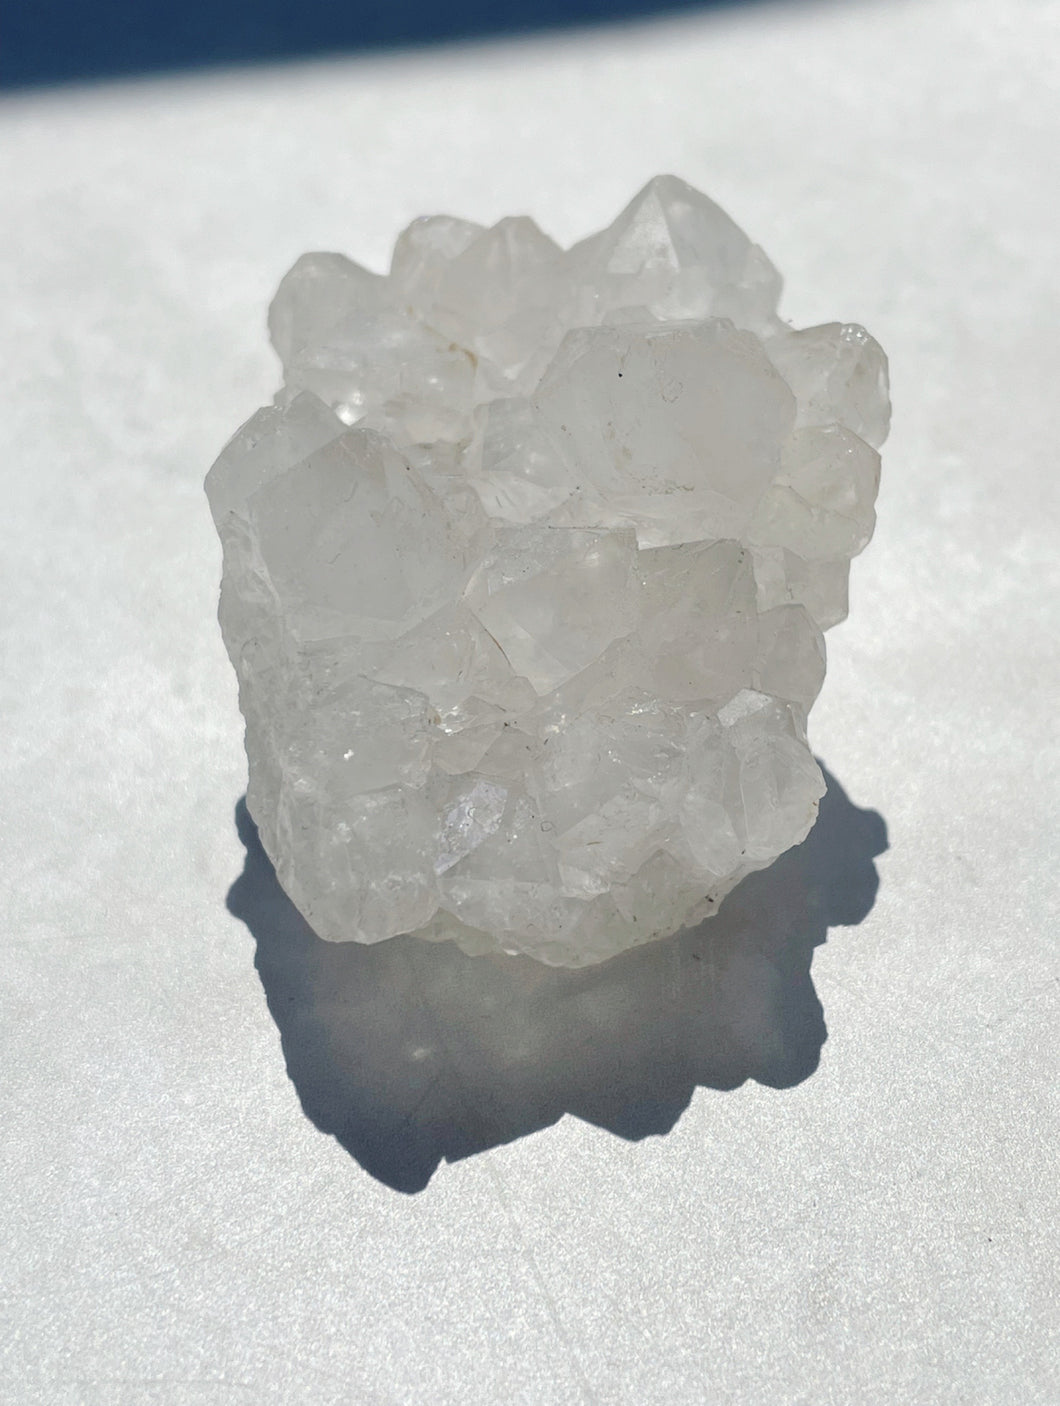 Anandalite Cluster